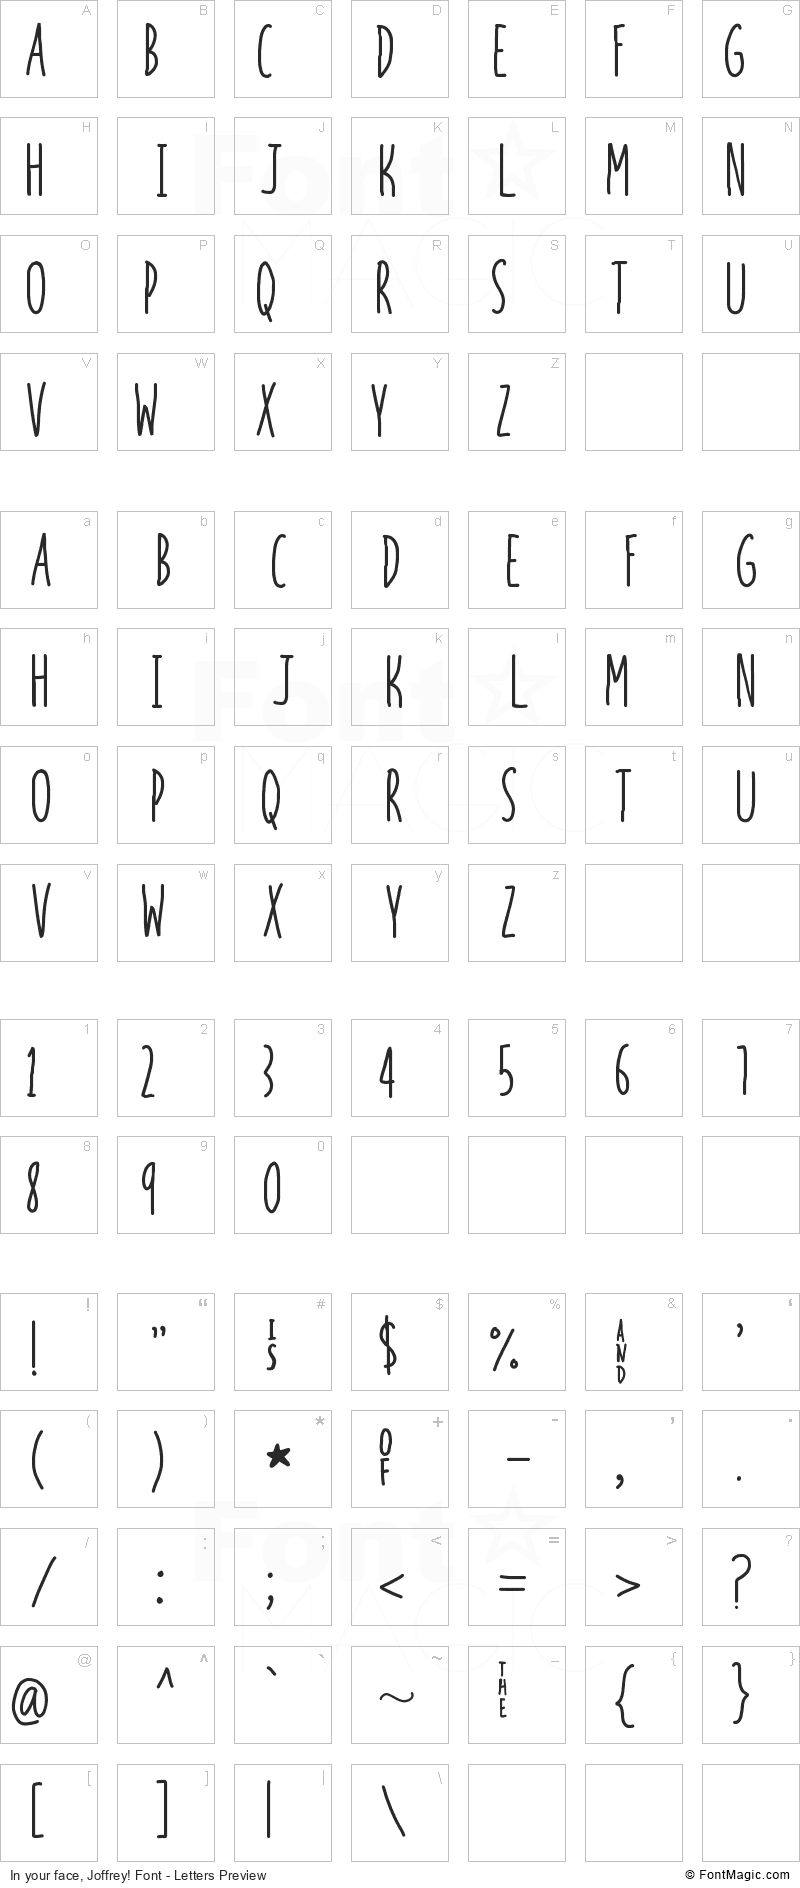 In your face, Joffrey! Font - All Latters Preview Chart